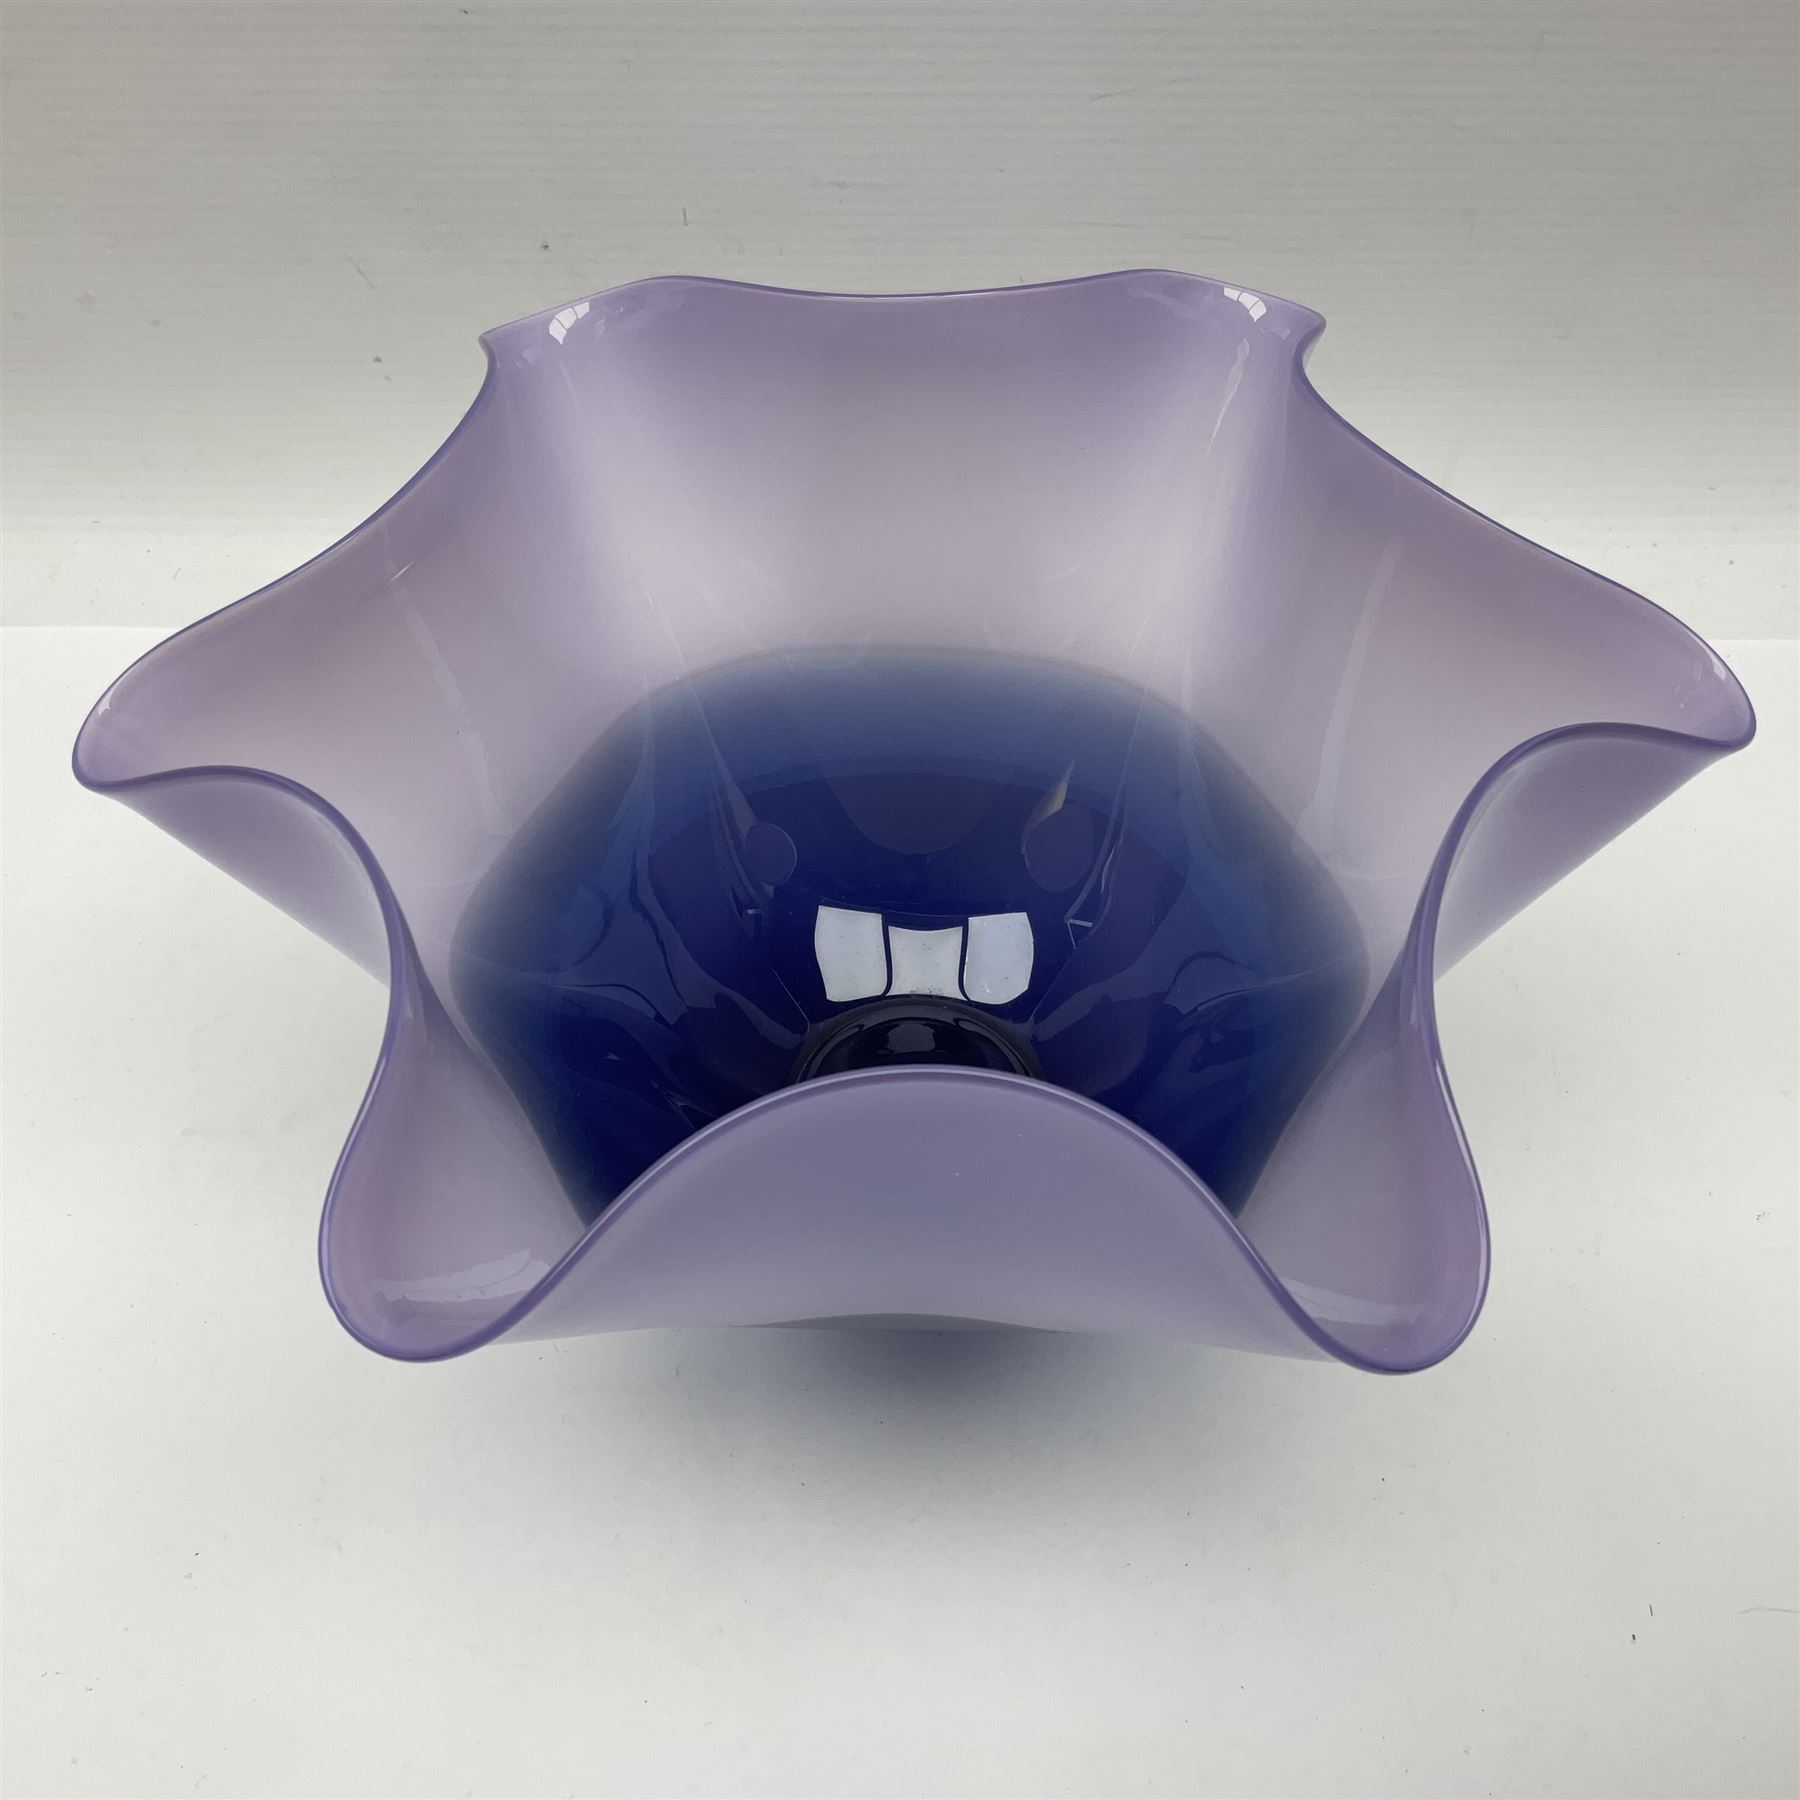 Gillies Jones of Rosedale two tone purple glass vase with crimped rim on a short pedestal foot - Image 2 of 7